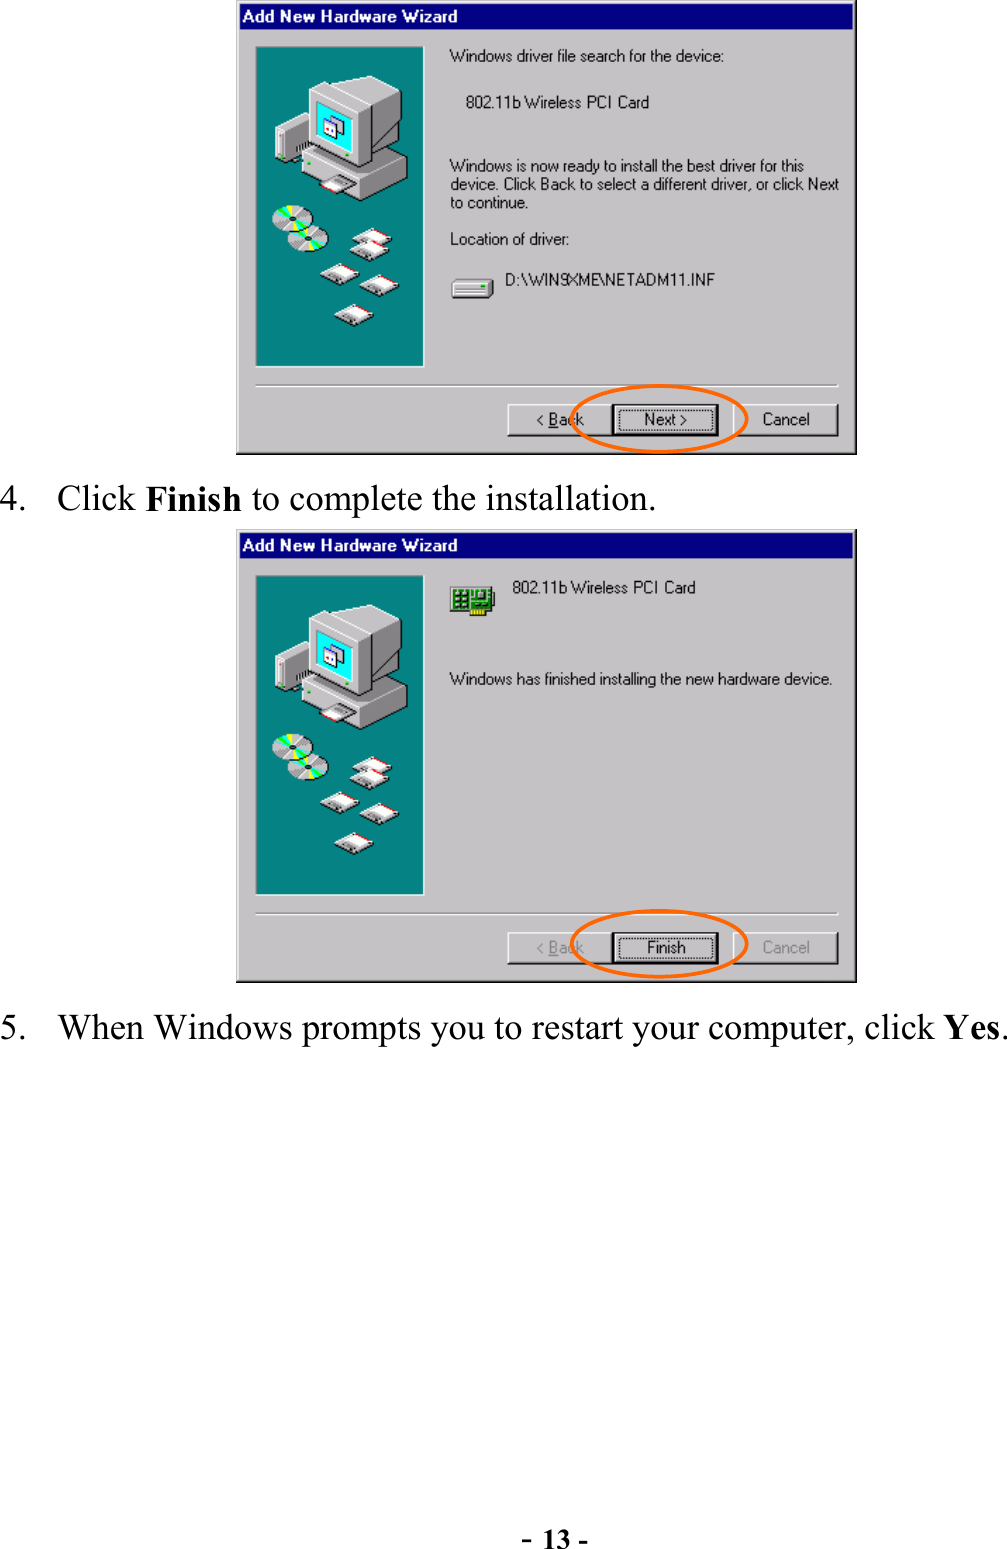  - 13 -  4. Click Finish to complete the installation.  5.  When Windows prompts you to restart your computer, click Yes.  